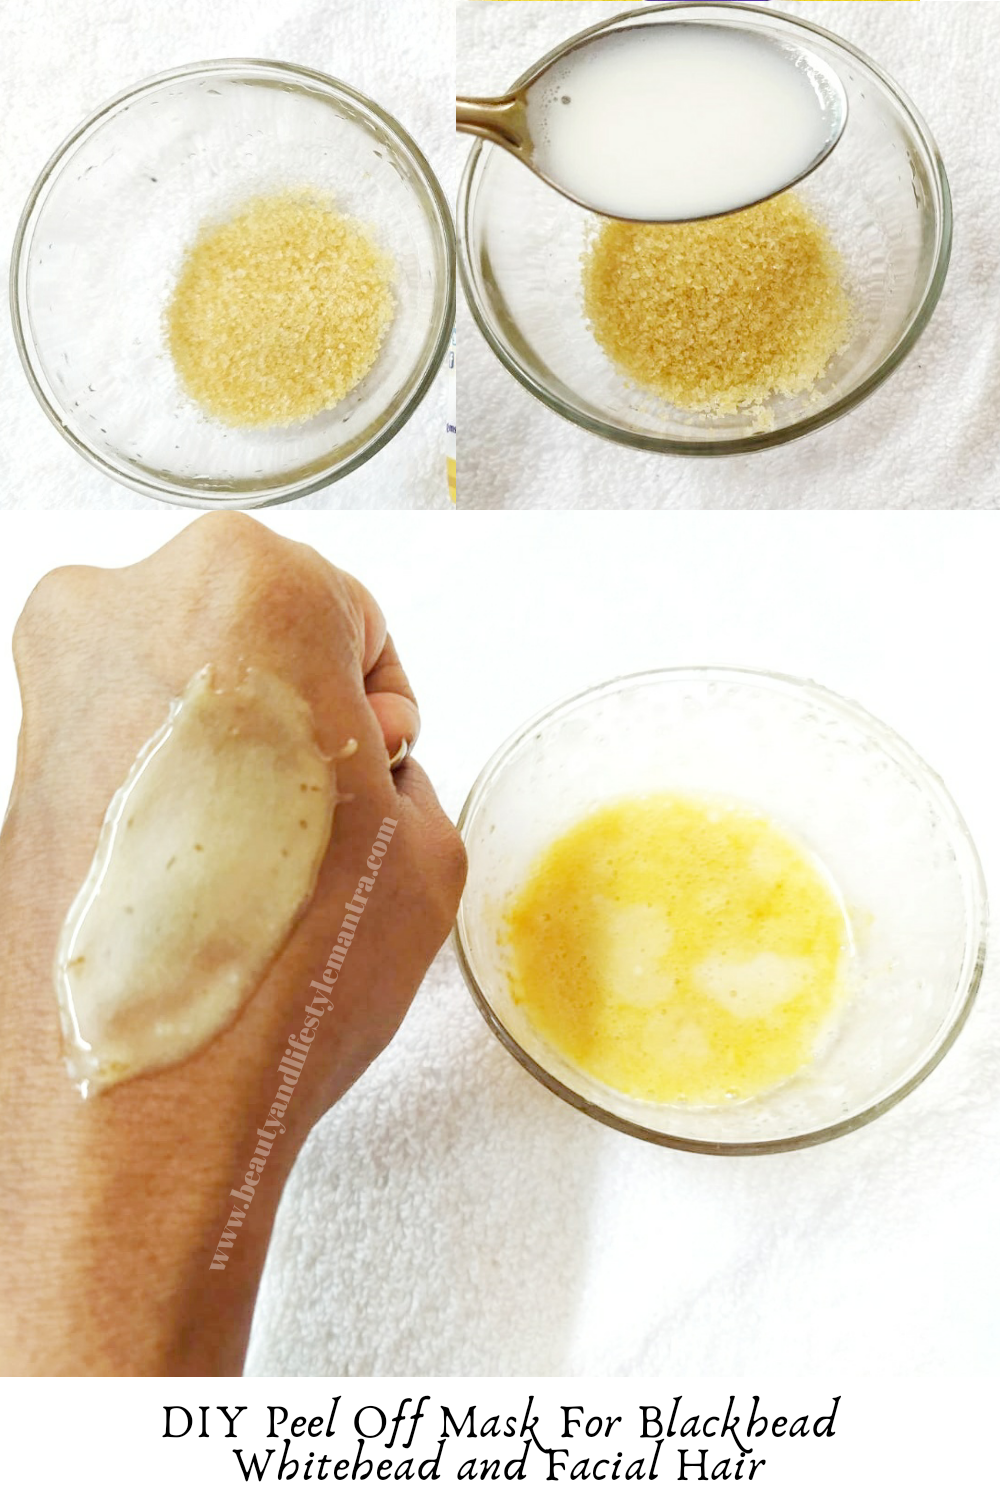 DIY Peel Off Mask For Blackhead Whitehead and Facial Hair - Beauty and Lifestyle Mantra - India's Top Beauty and Blog